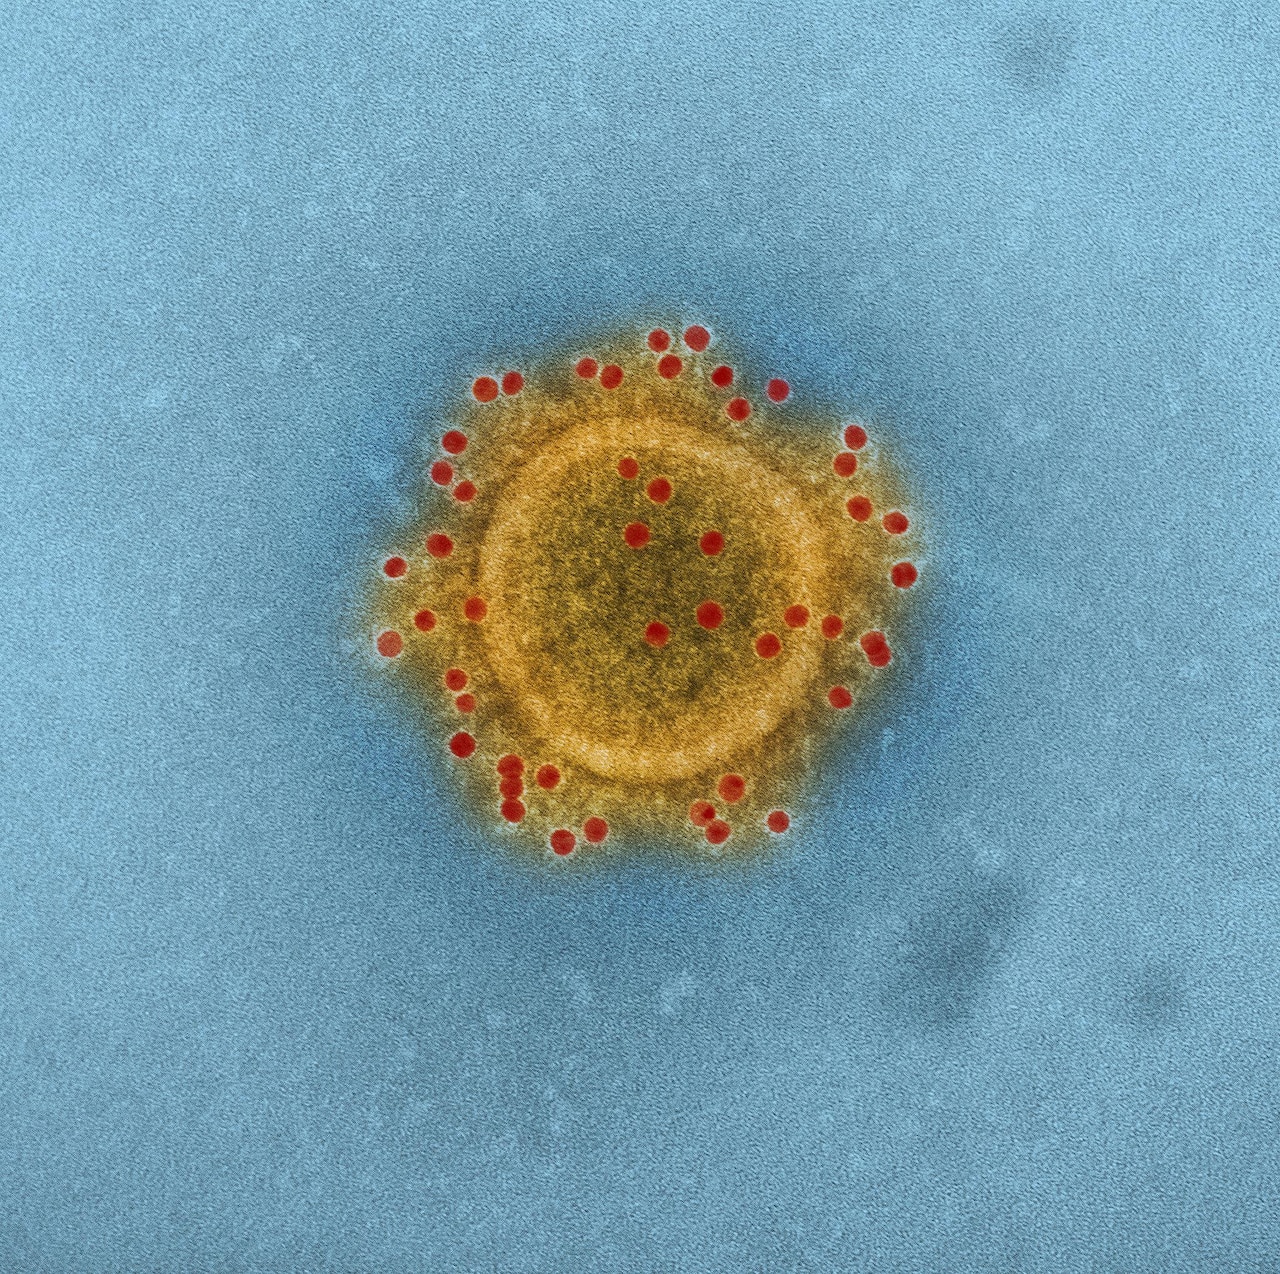 This image shows Middle East respiratory syndrome coronavirus particle envelope proteins immunolabeled with rabbit HCoV-EMC/2012 primary antibody and goat anti-rabbit 10-nanometer gold particles. National Institute of Allergy and Infectious Disease photo